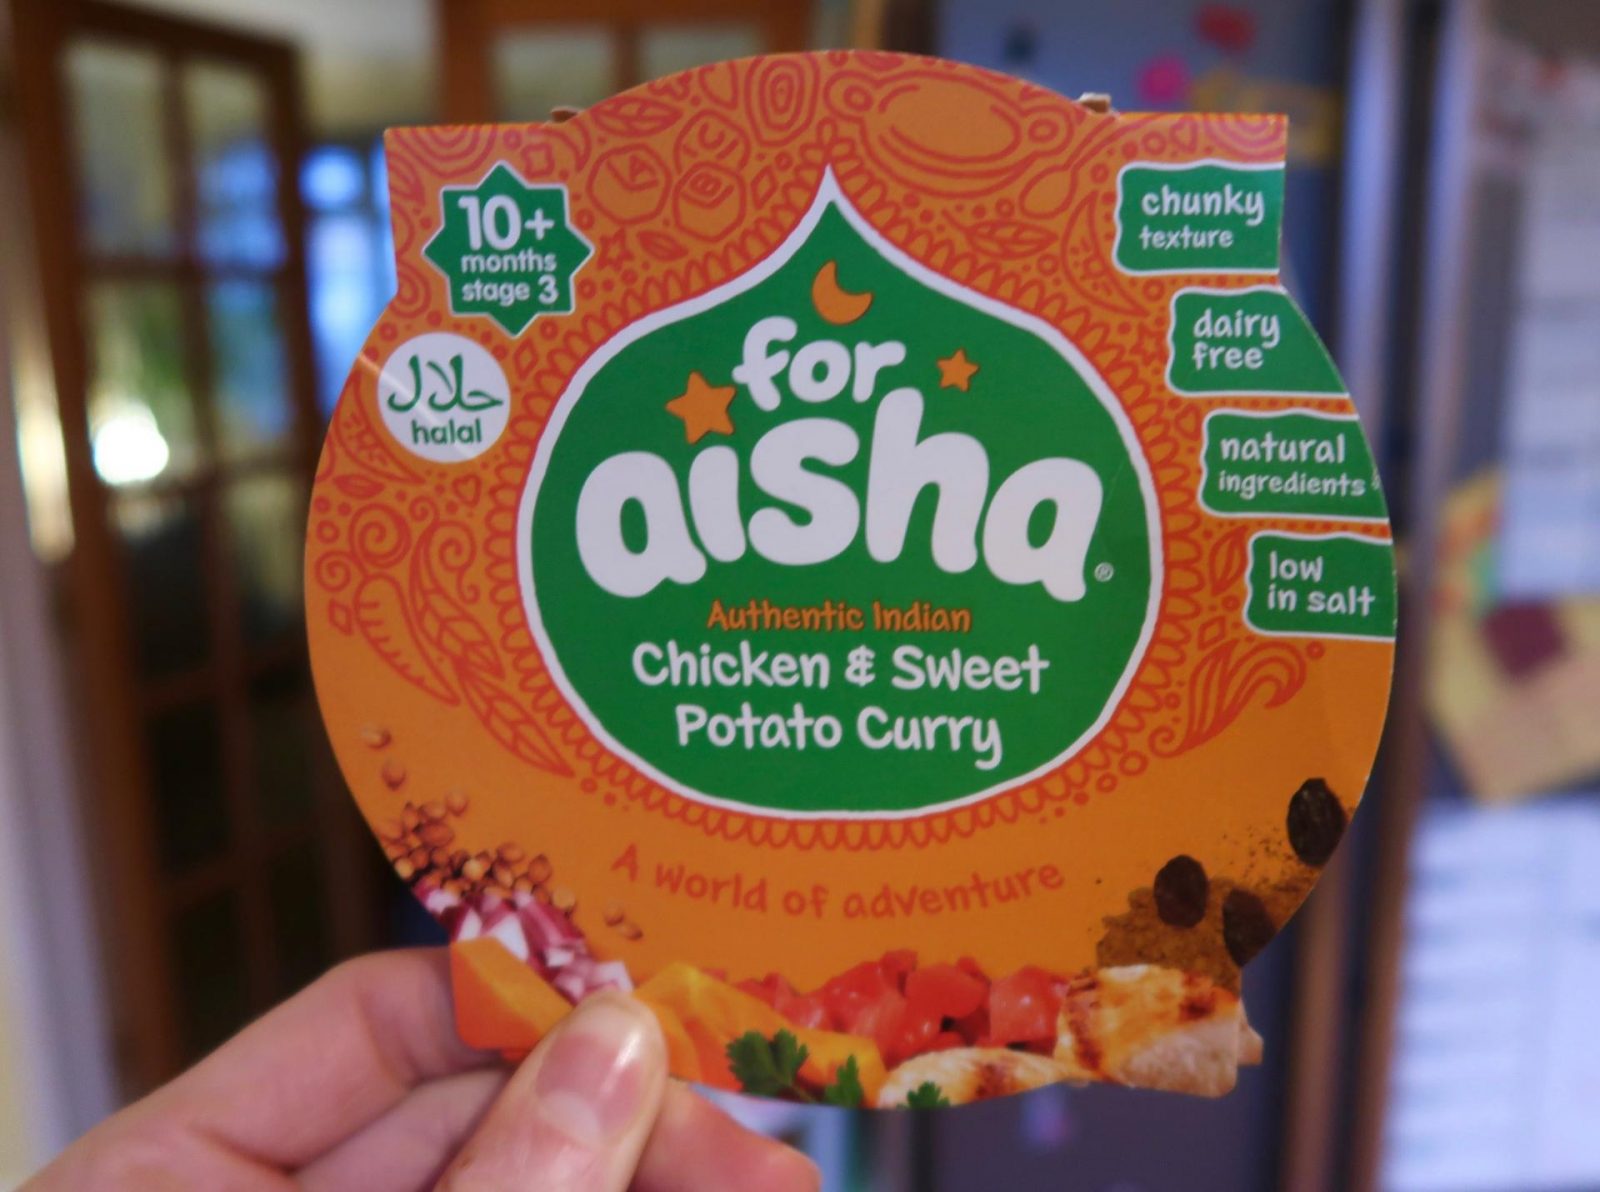 For Aisha chicken and sweet potato curry pack